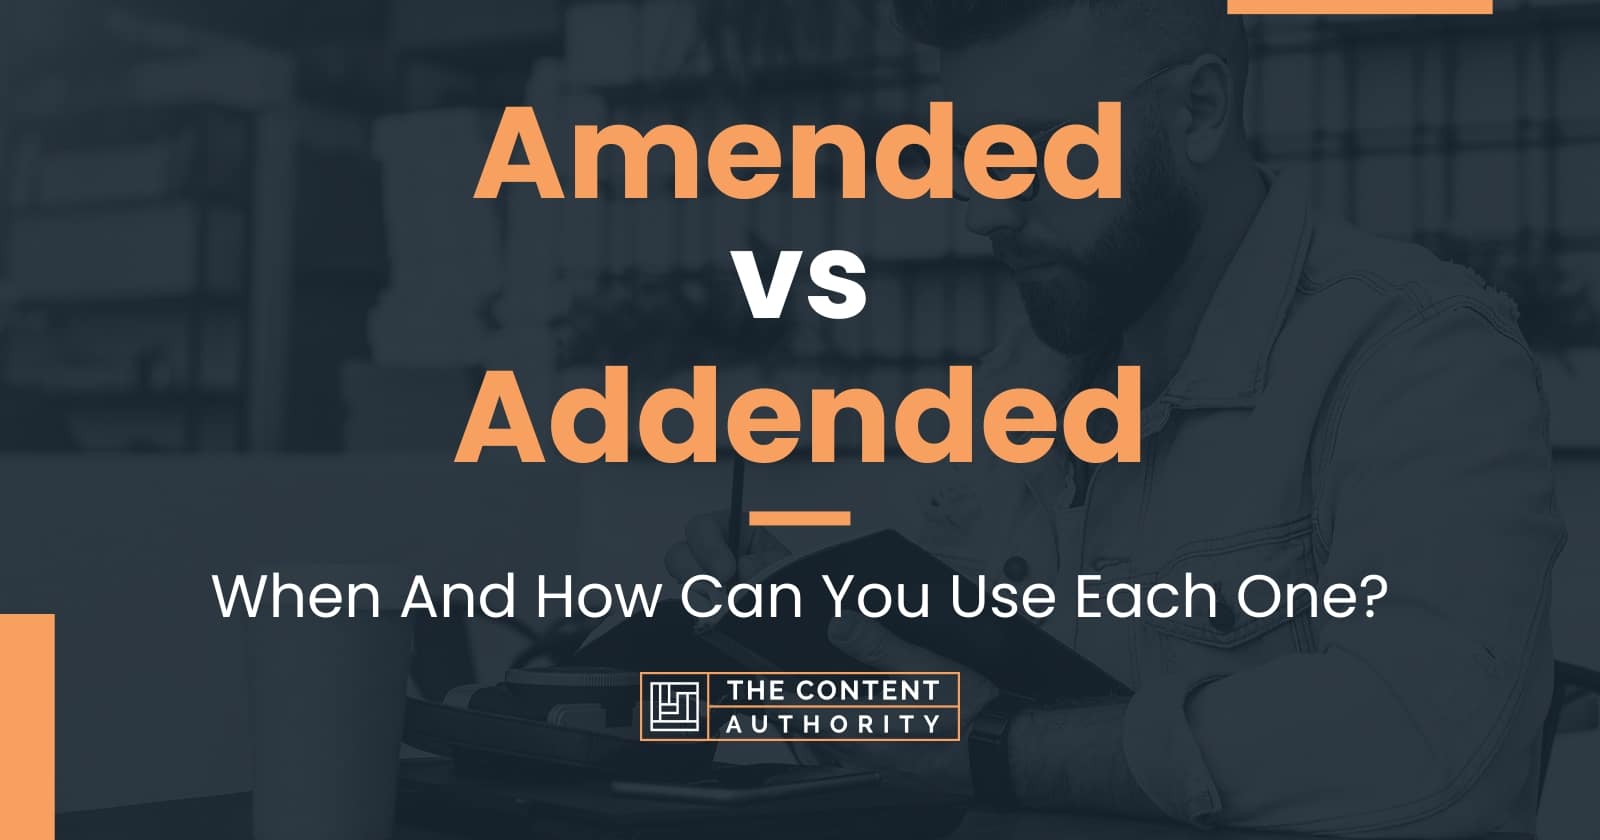 Amended vs Addended: When And How Can You Use Each One?